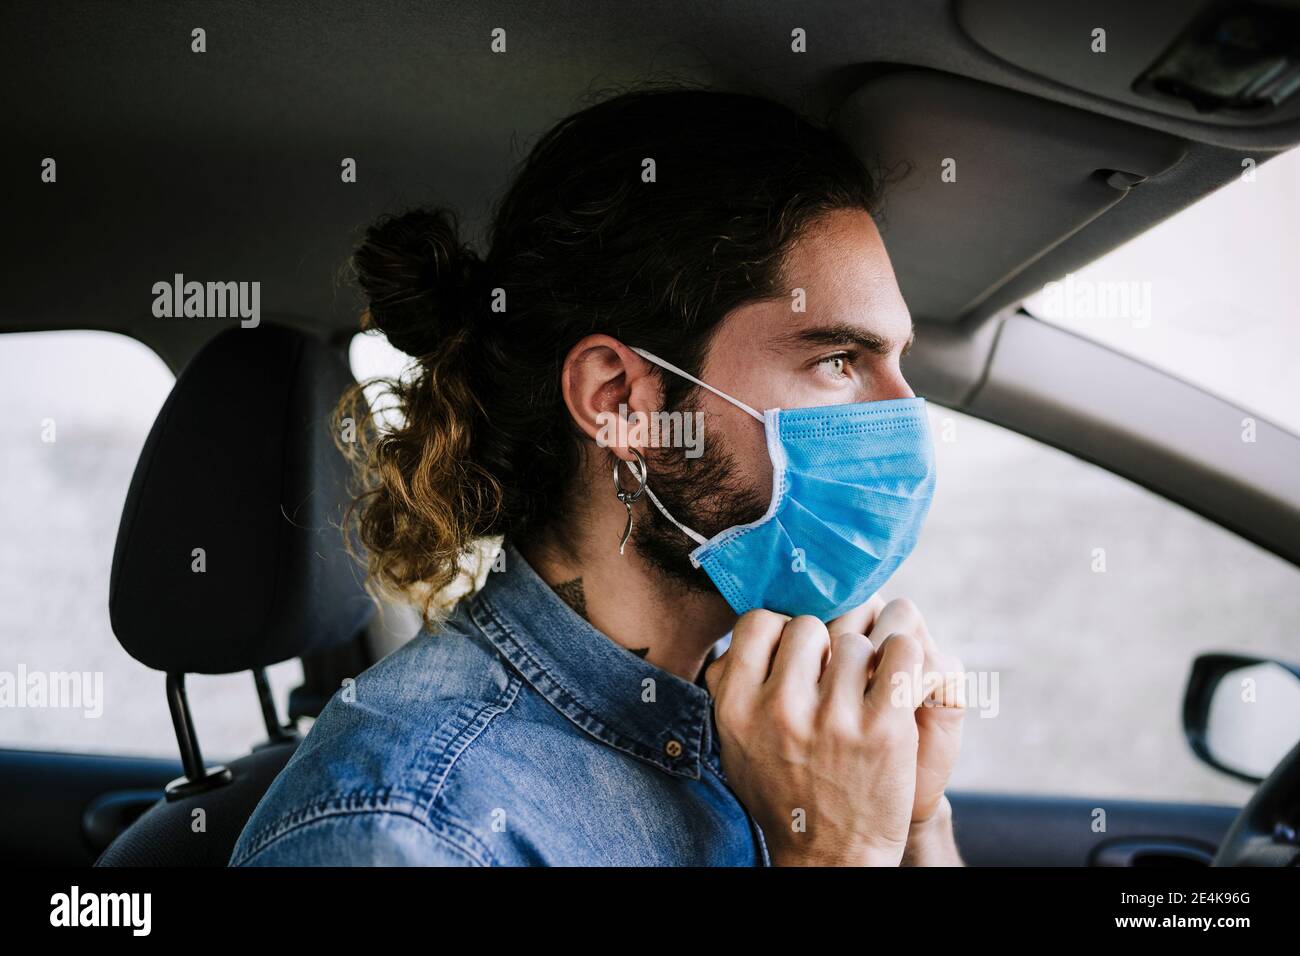 Stylish young man adjusting protective face mask in car Stock Photo